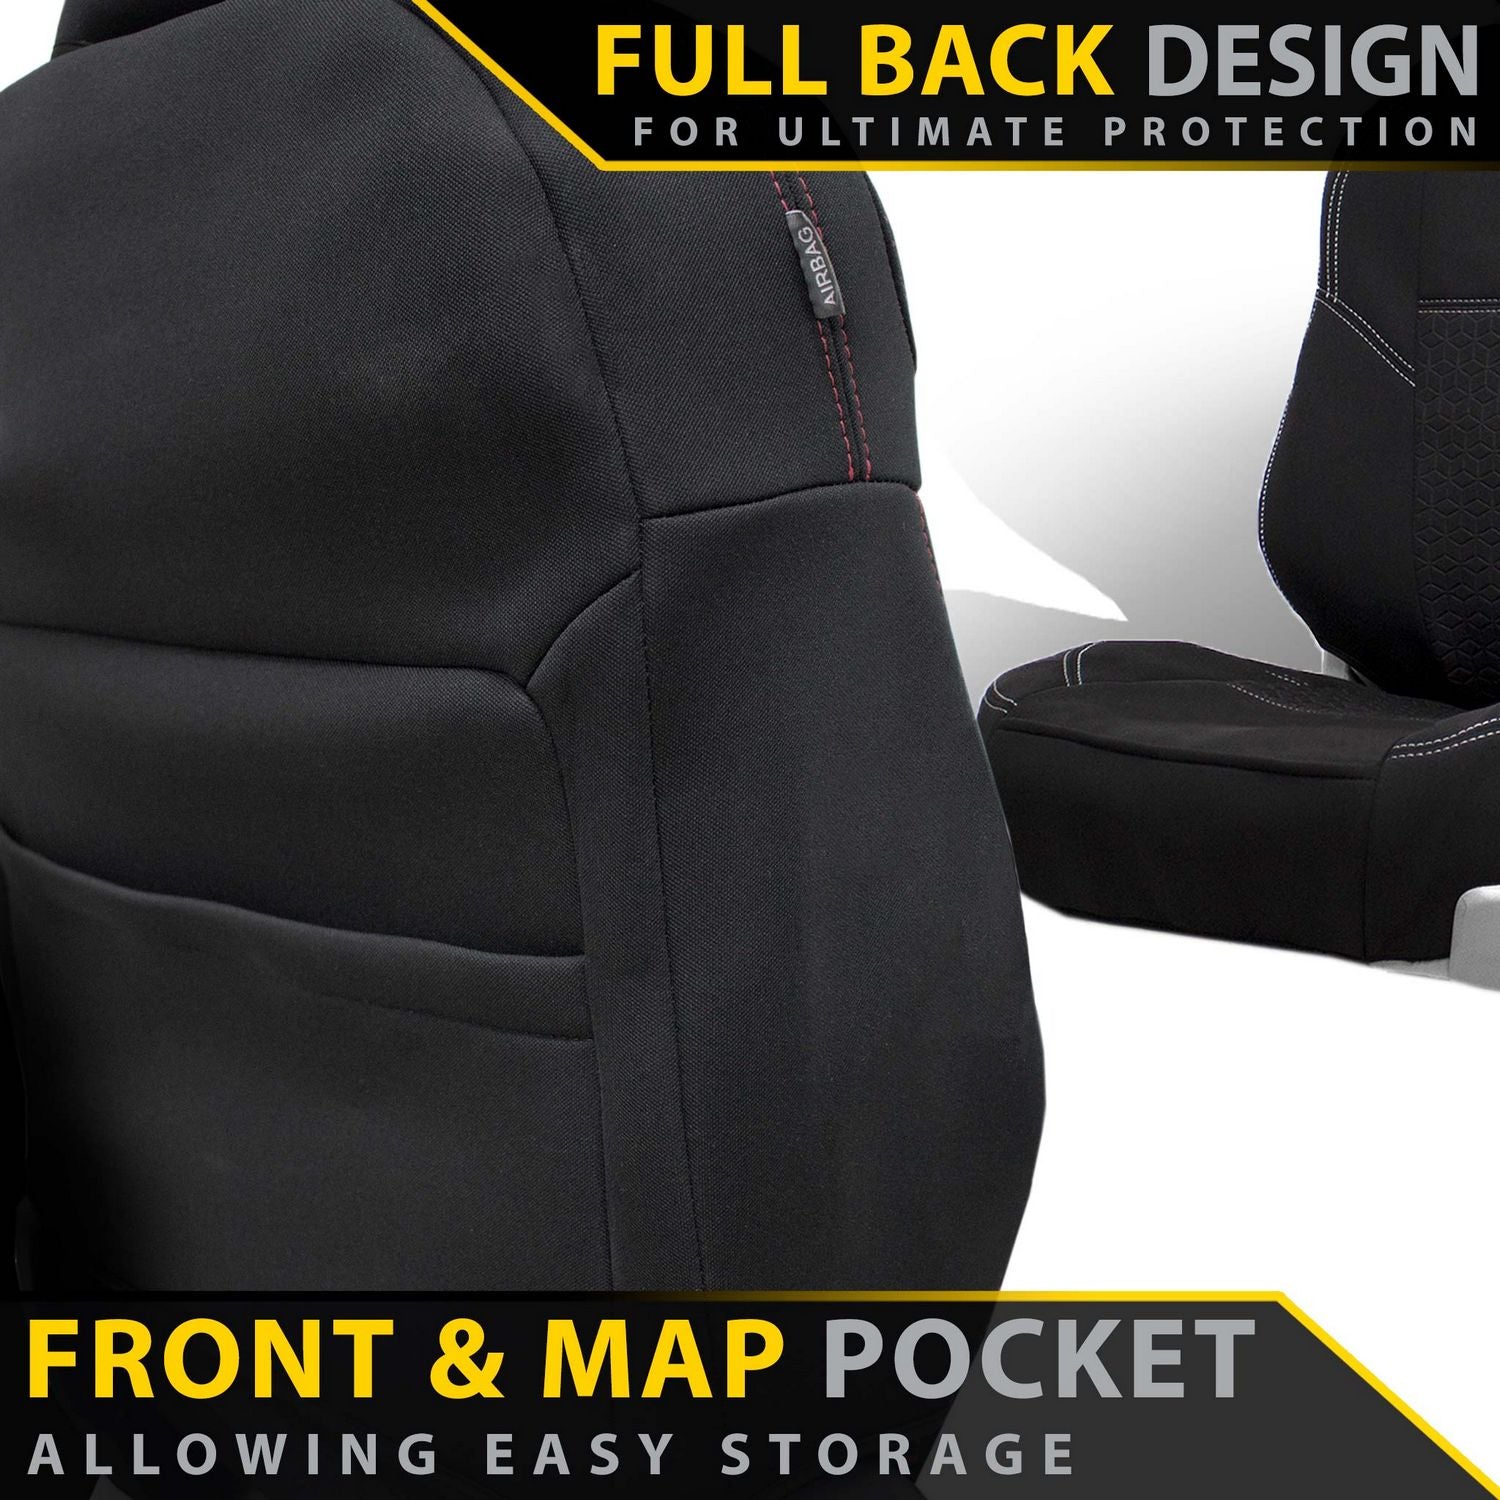 Holden Colorado RG Premium Neoprene 2x Front Seat Covers (Made to Order)